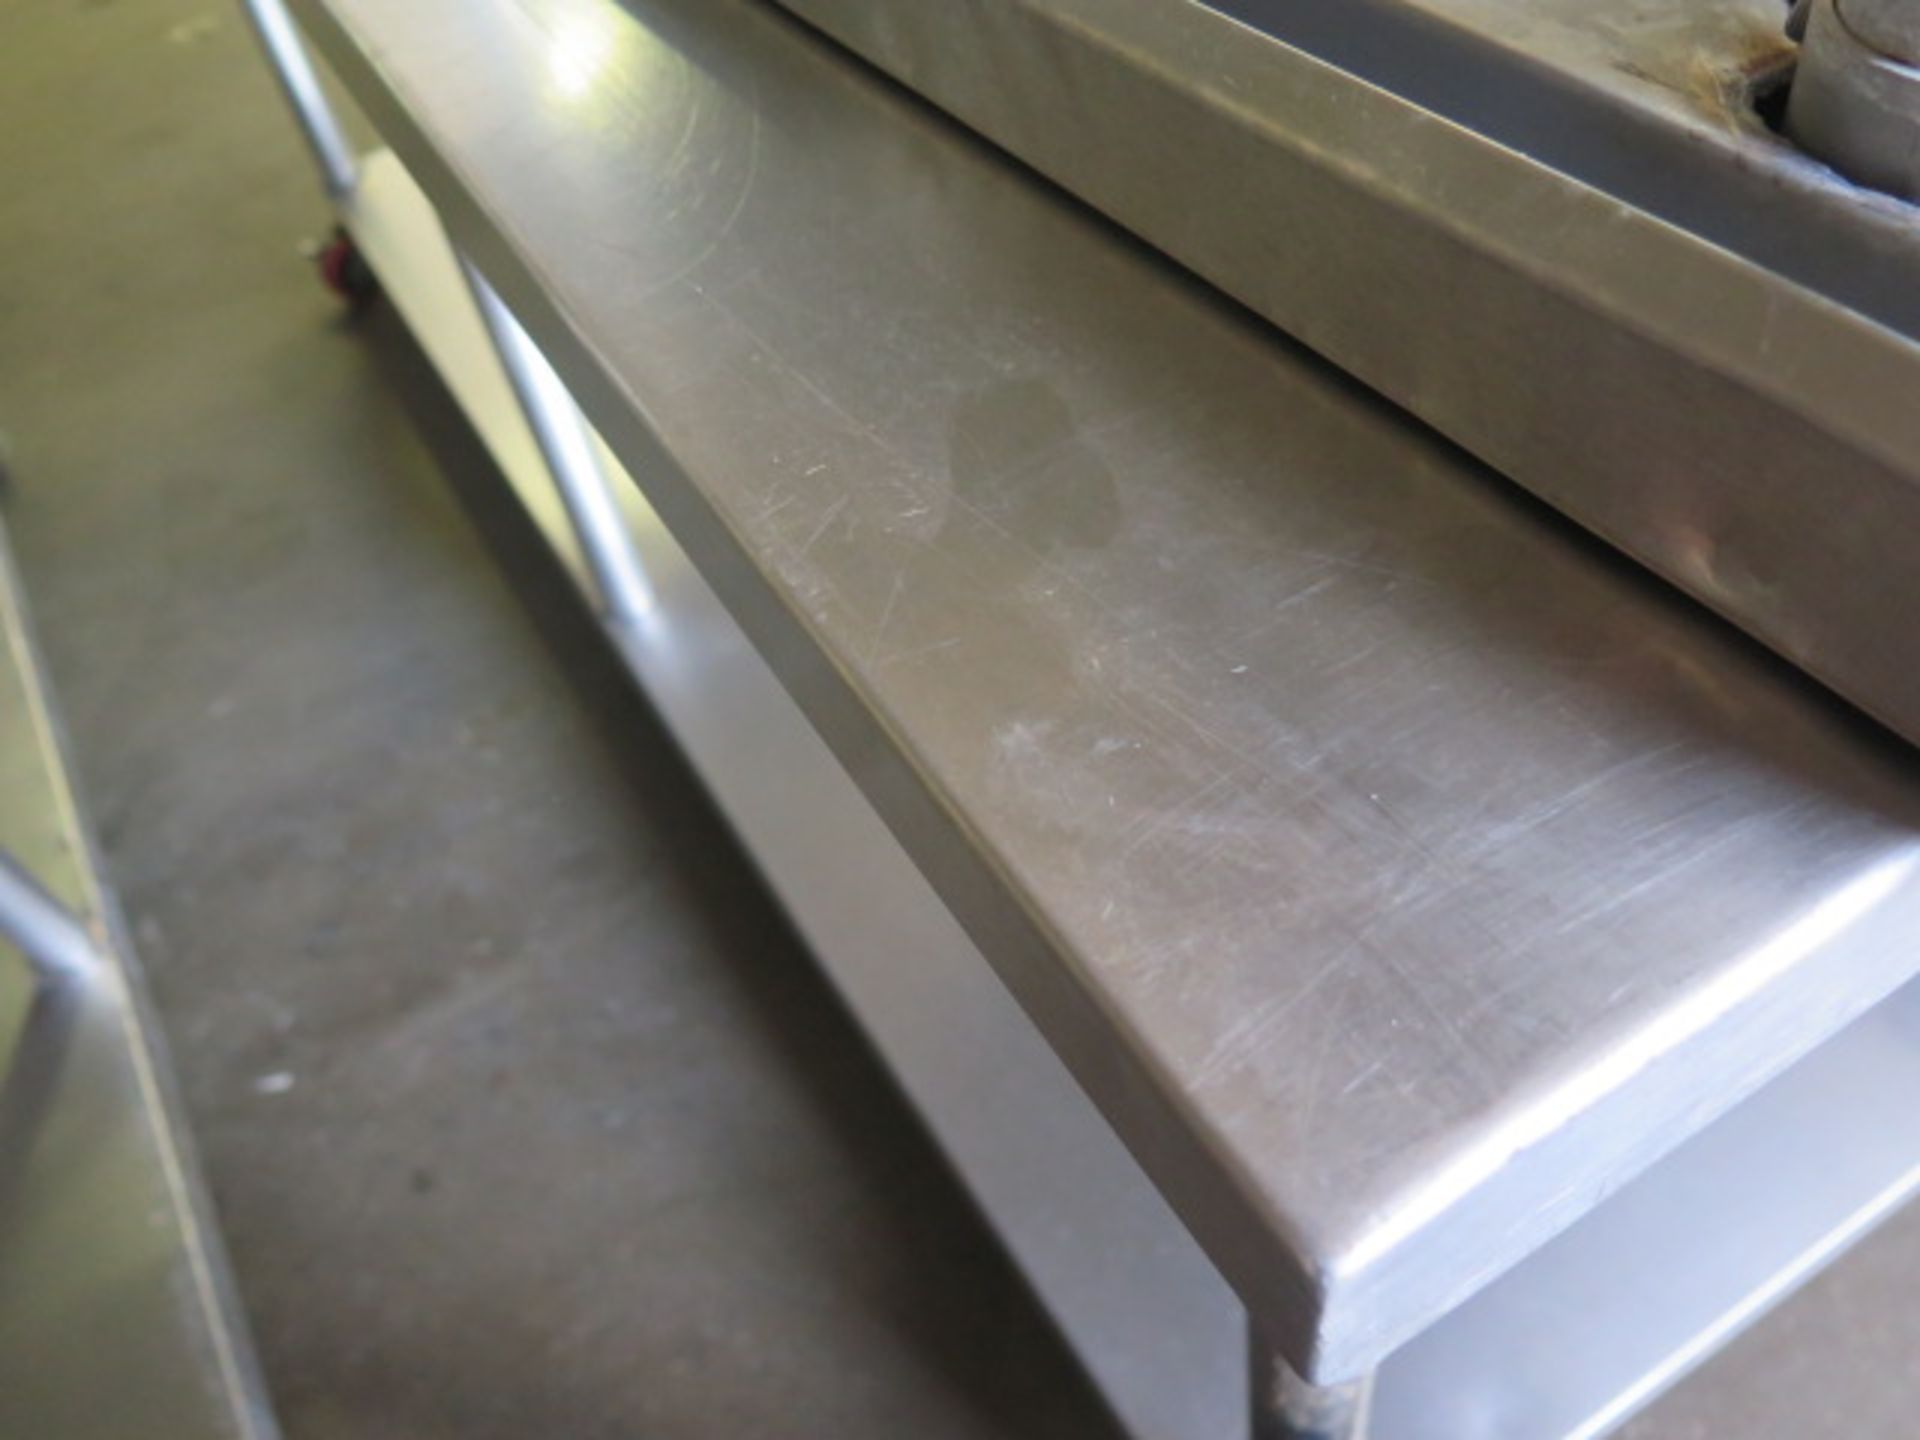 30” x 72” Rolling Stainless Steel Tables (2) - Image 3 of 3